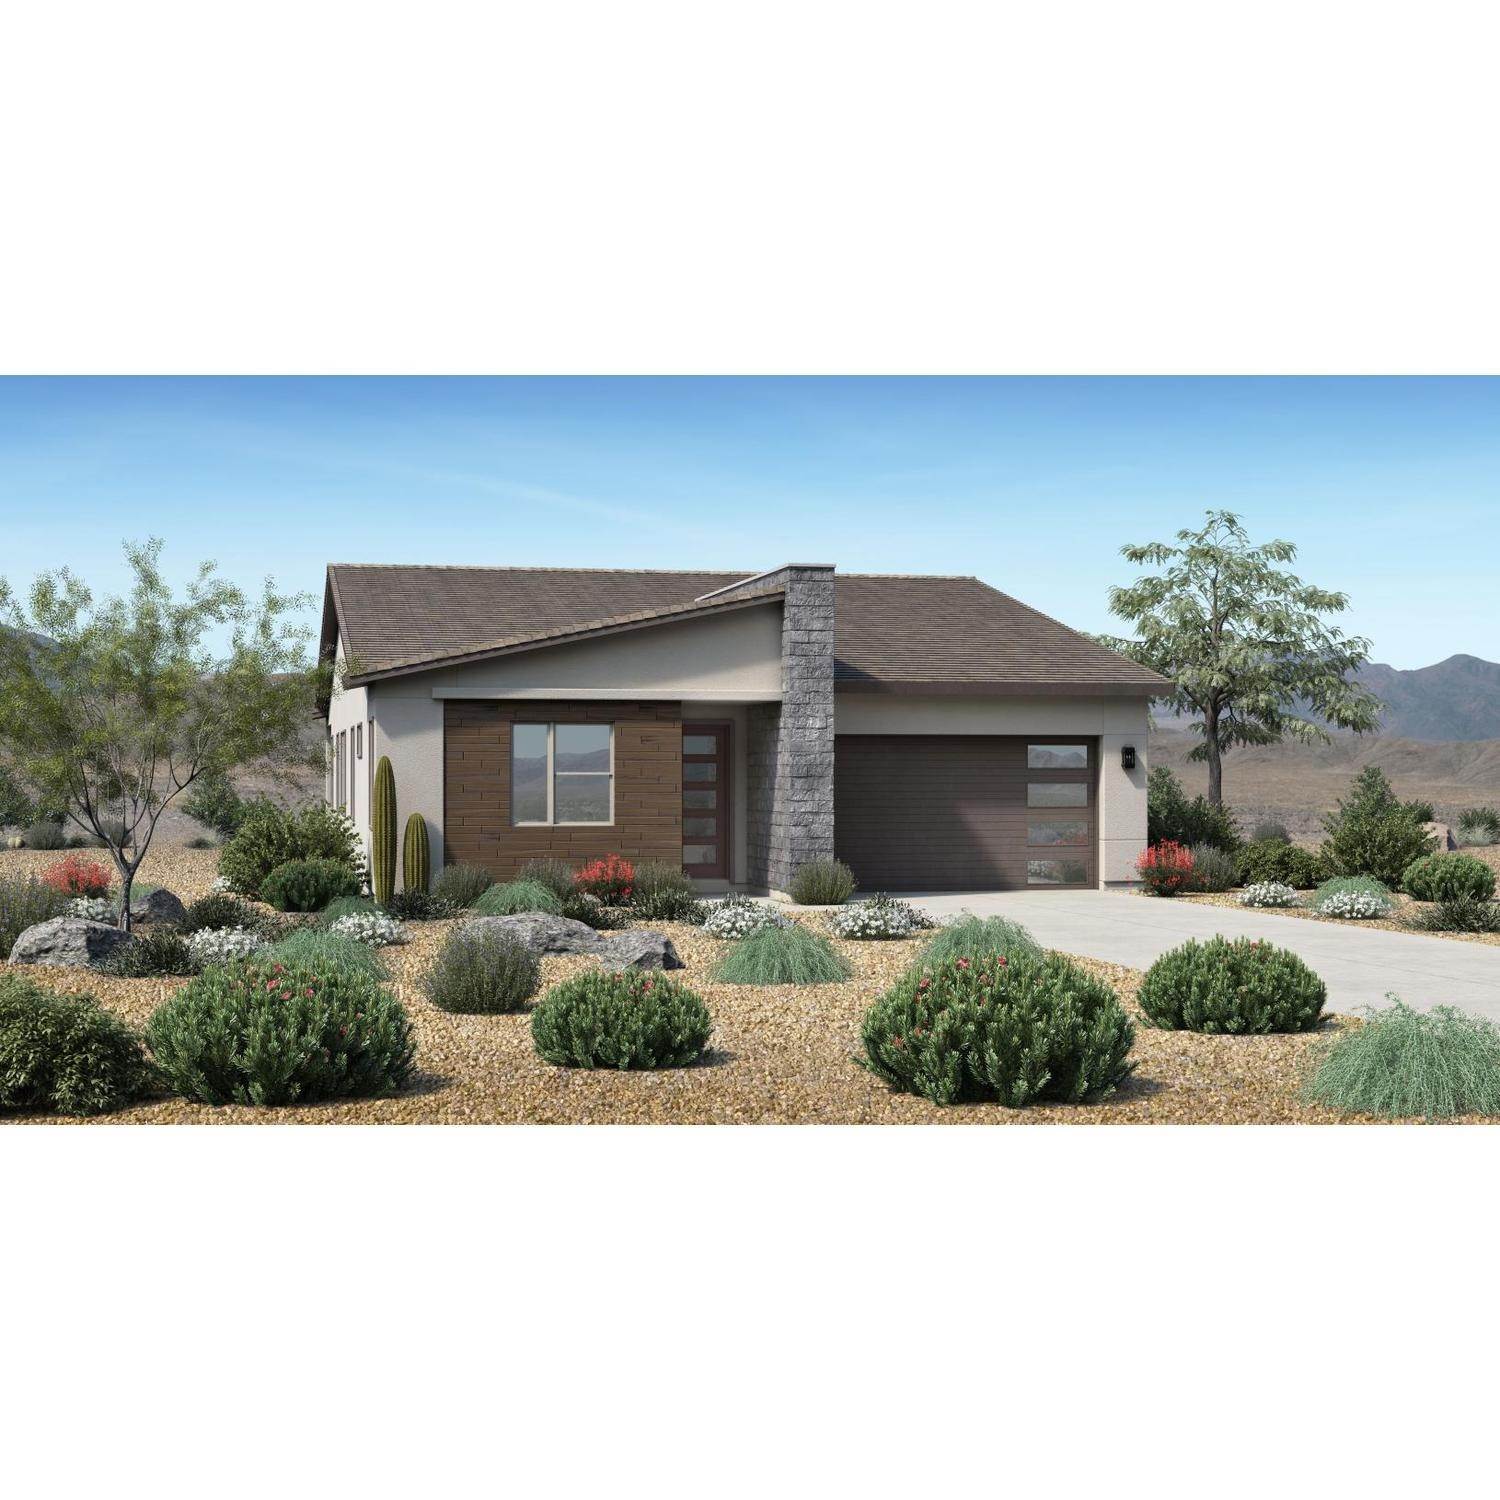 Single Family for Sale at Toll Brothers At Cadence - Mosaic Collection 10108 E Tesla Ave, Mesa, AZ 85212